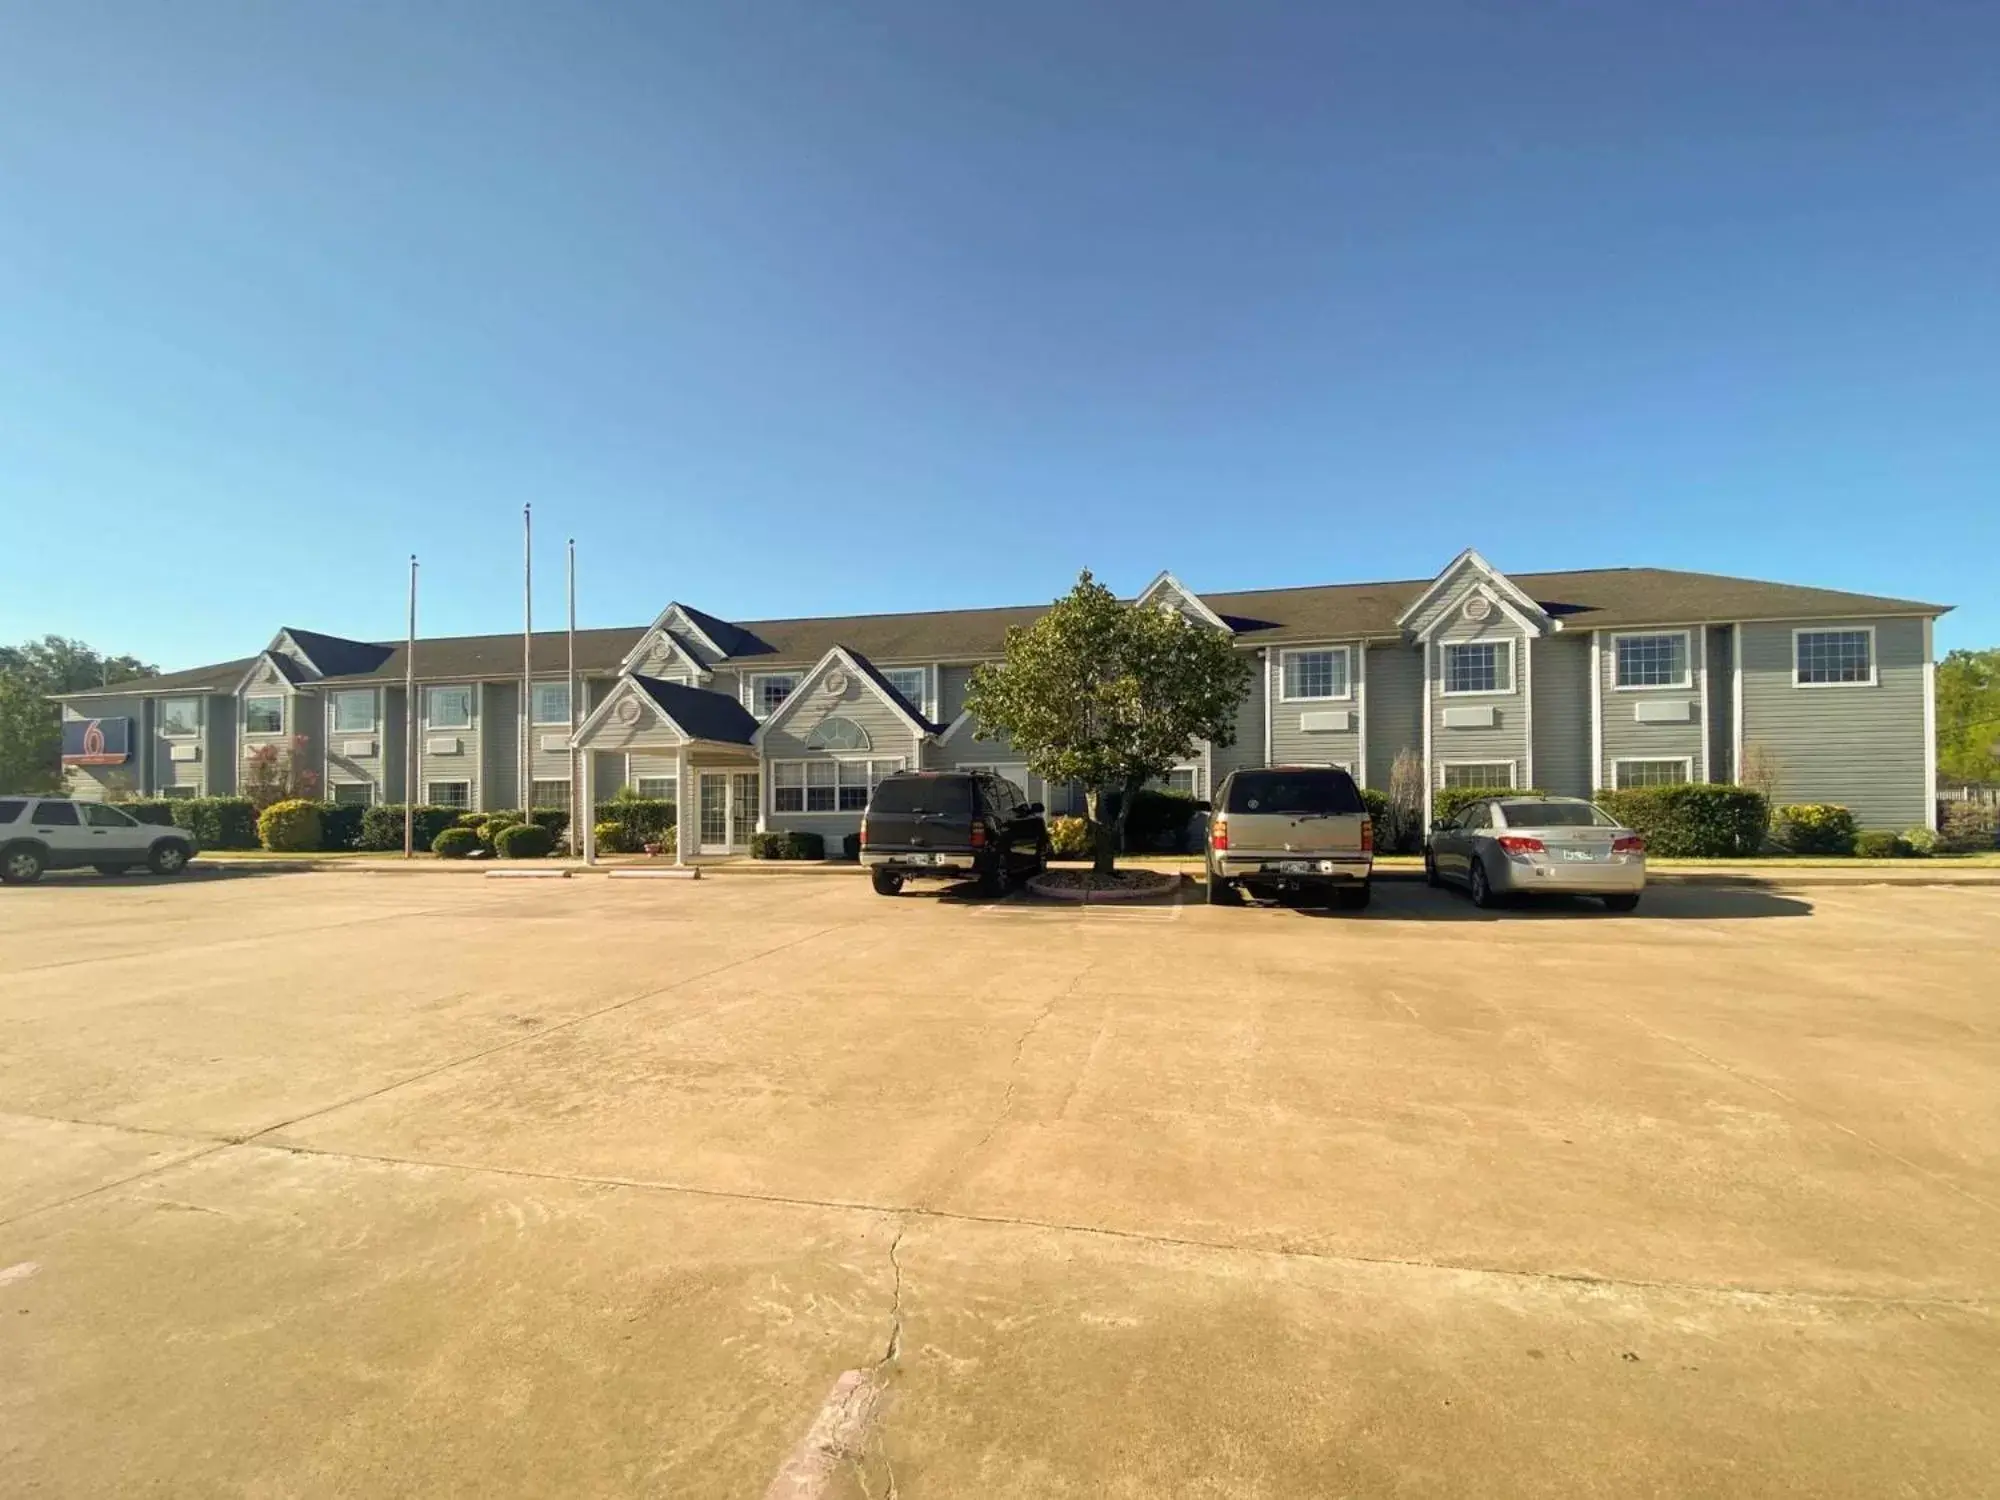 Property Building in Motel 6 McAlester OK - South